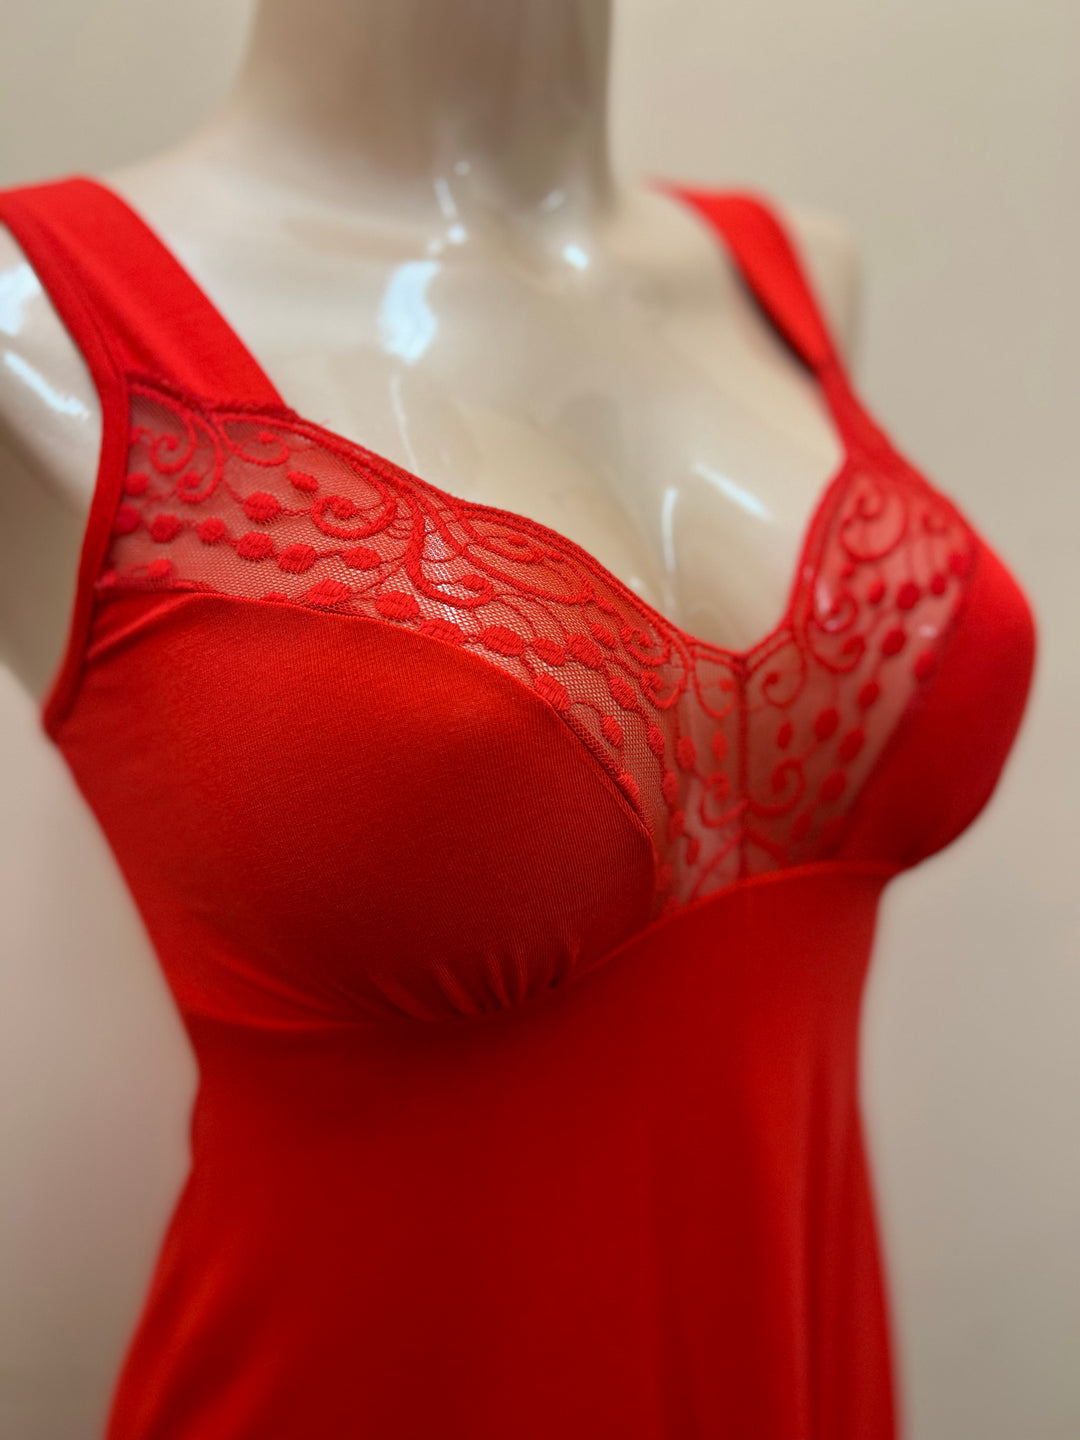 Najerika Chemise - Red - Size Small